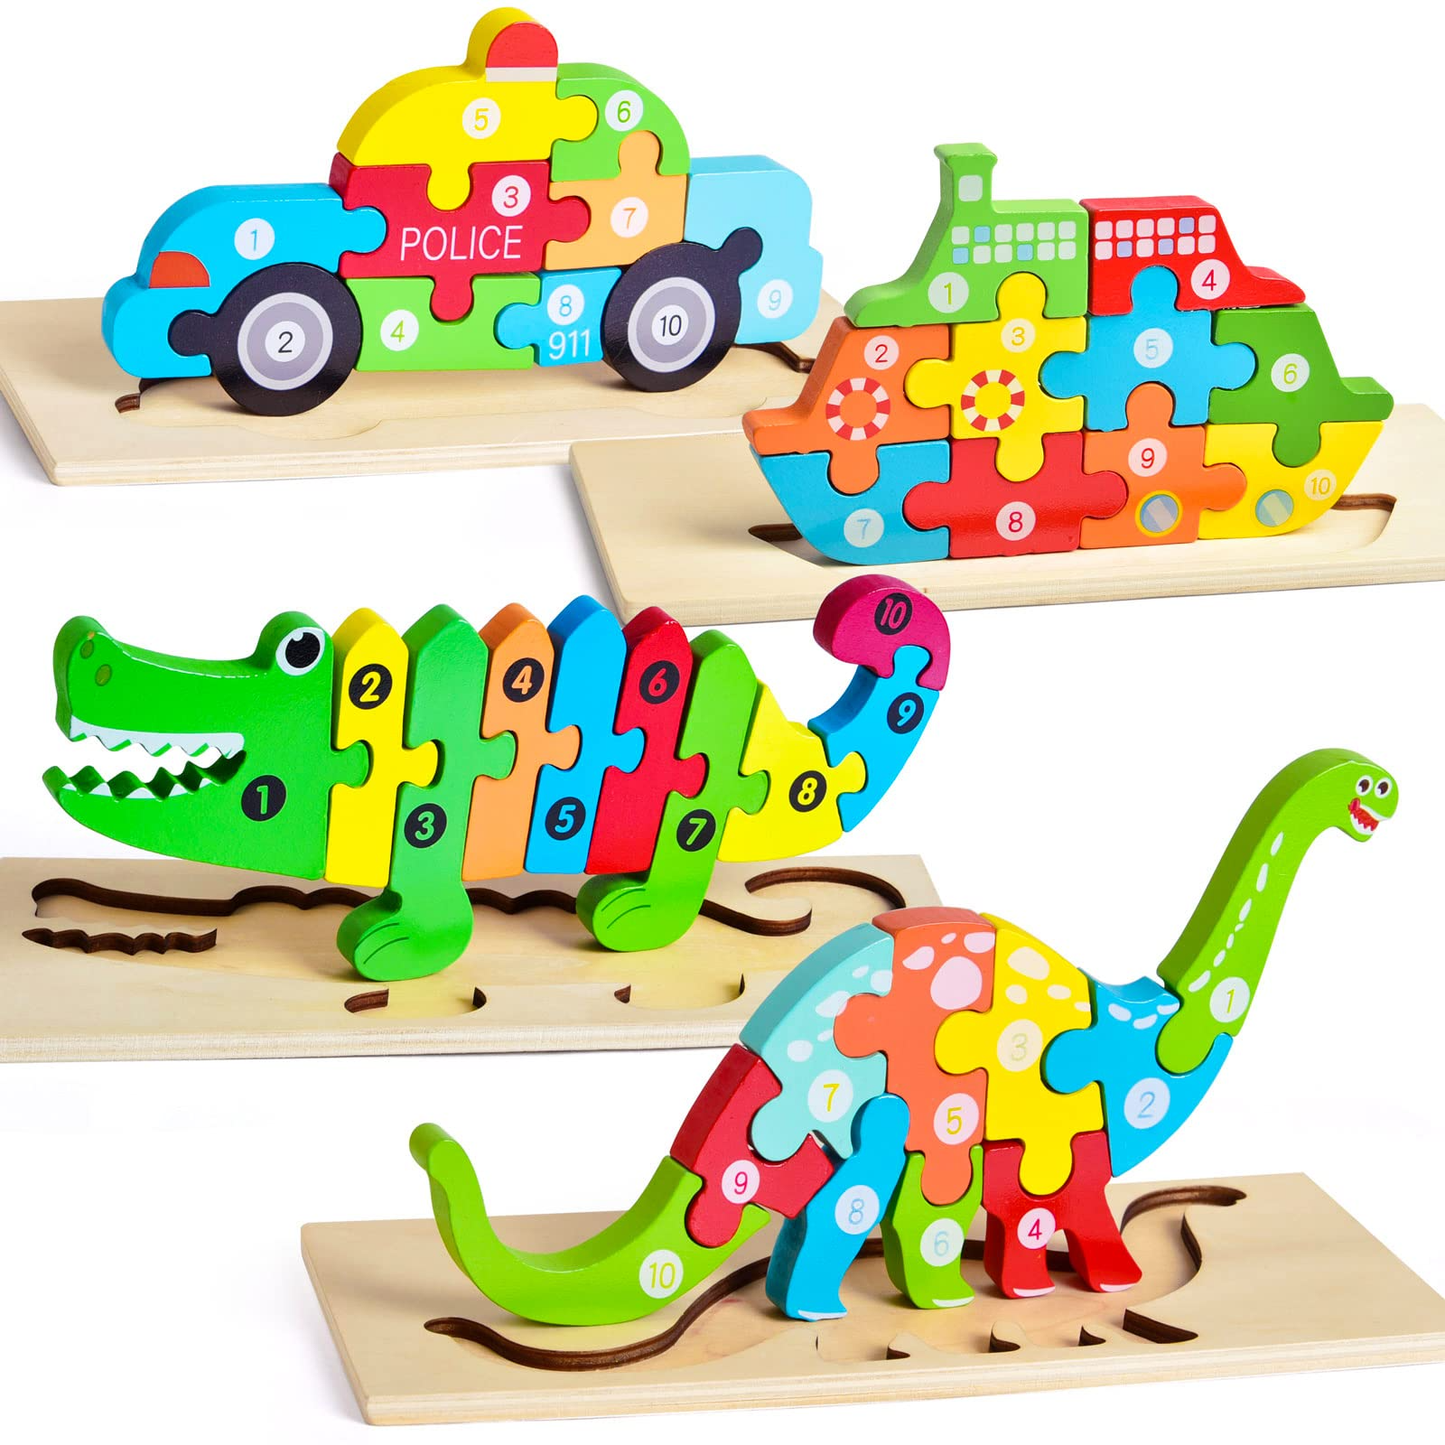 4-Pack Wooden Puzzles for Toddlers Age 2-4 Years Old